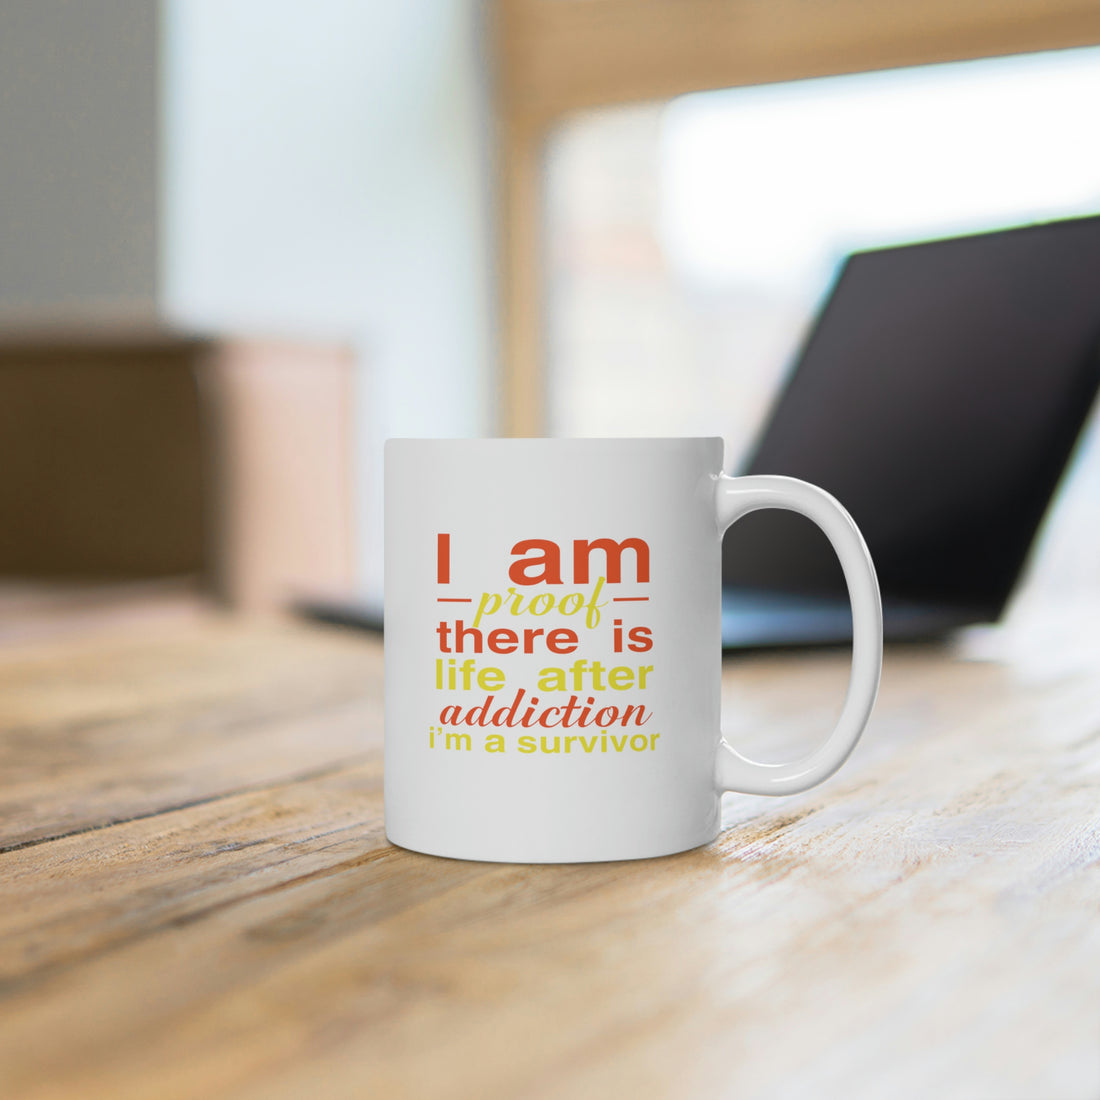 I Am Proof There Is Life After Addiction - White Ceramic Mug 2 sizes Available